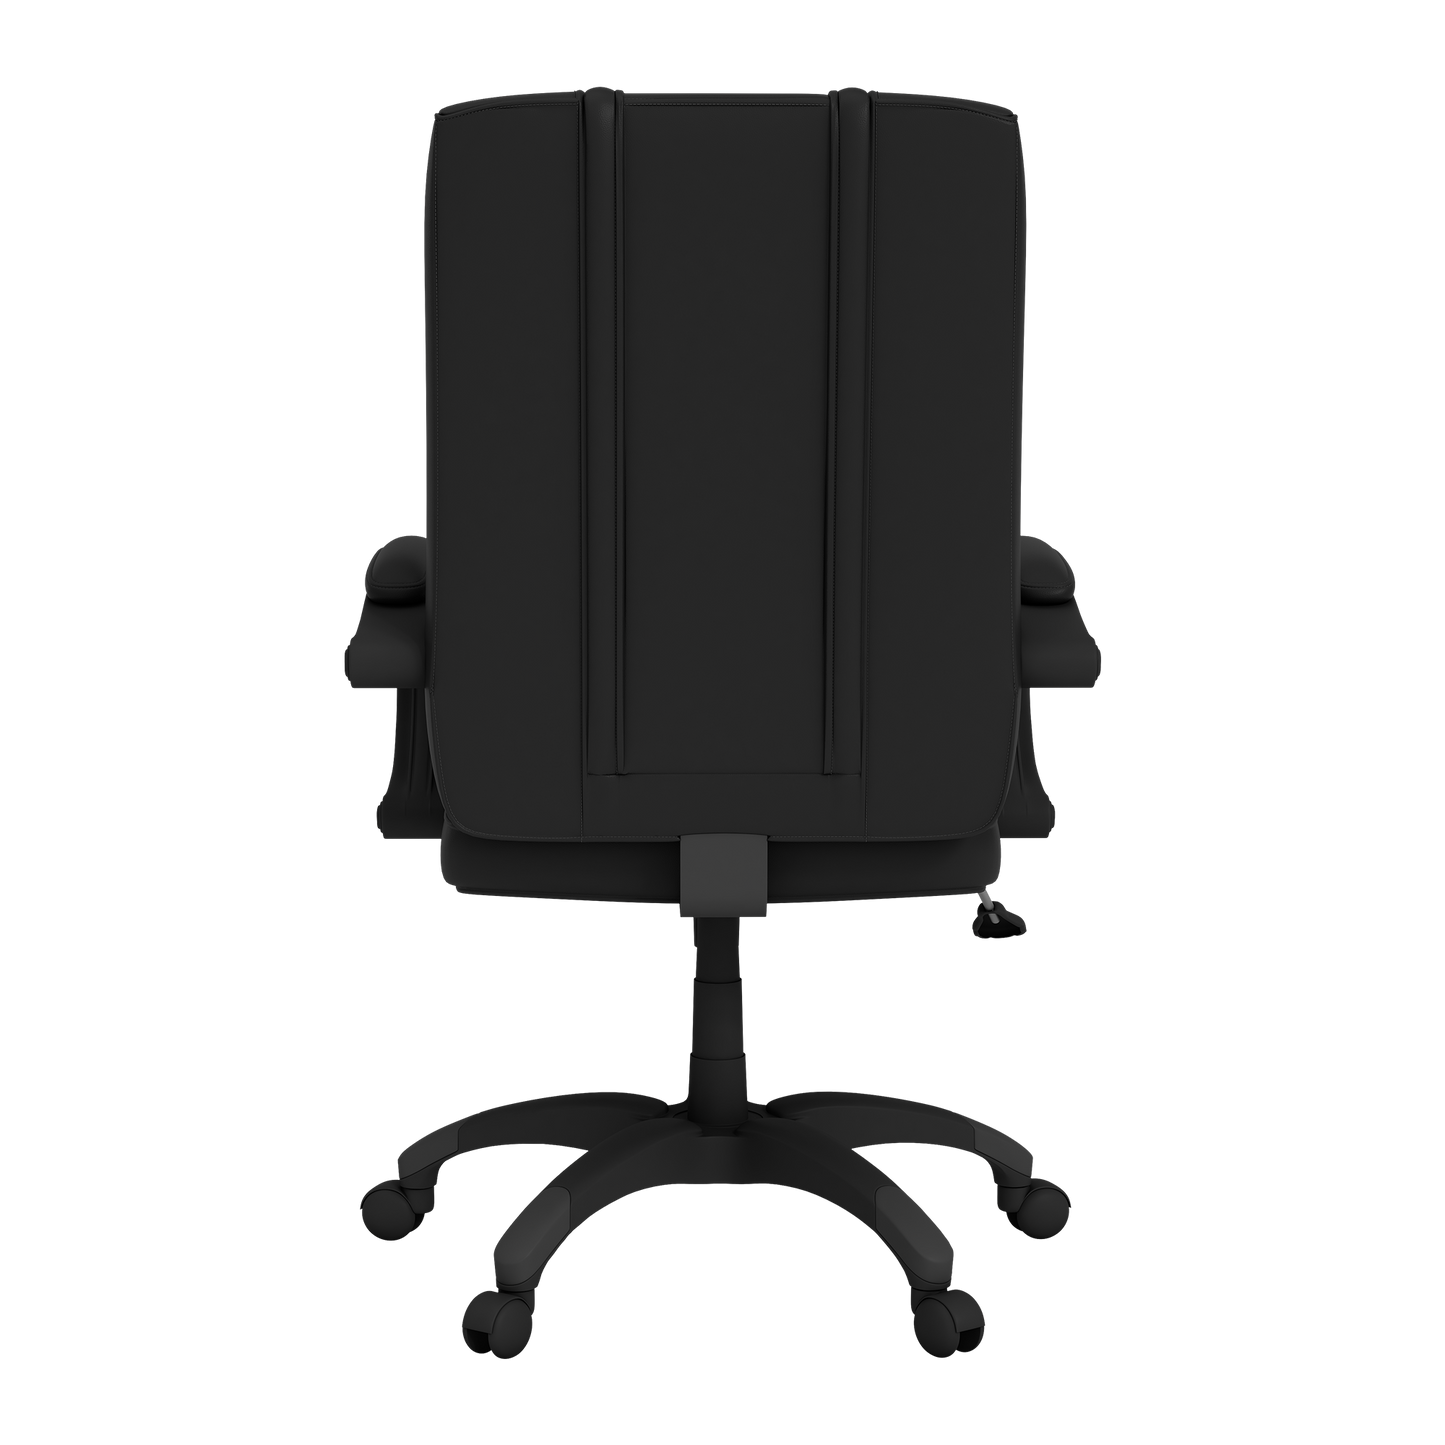 Office Chair 1000 with Washington Wizards Secondary